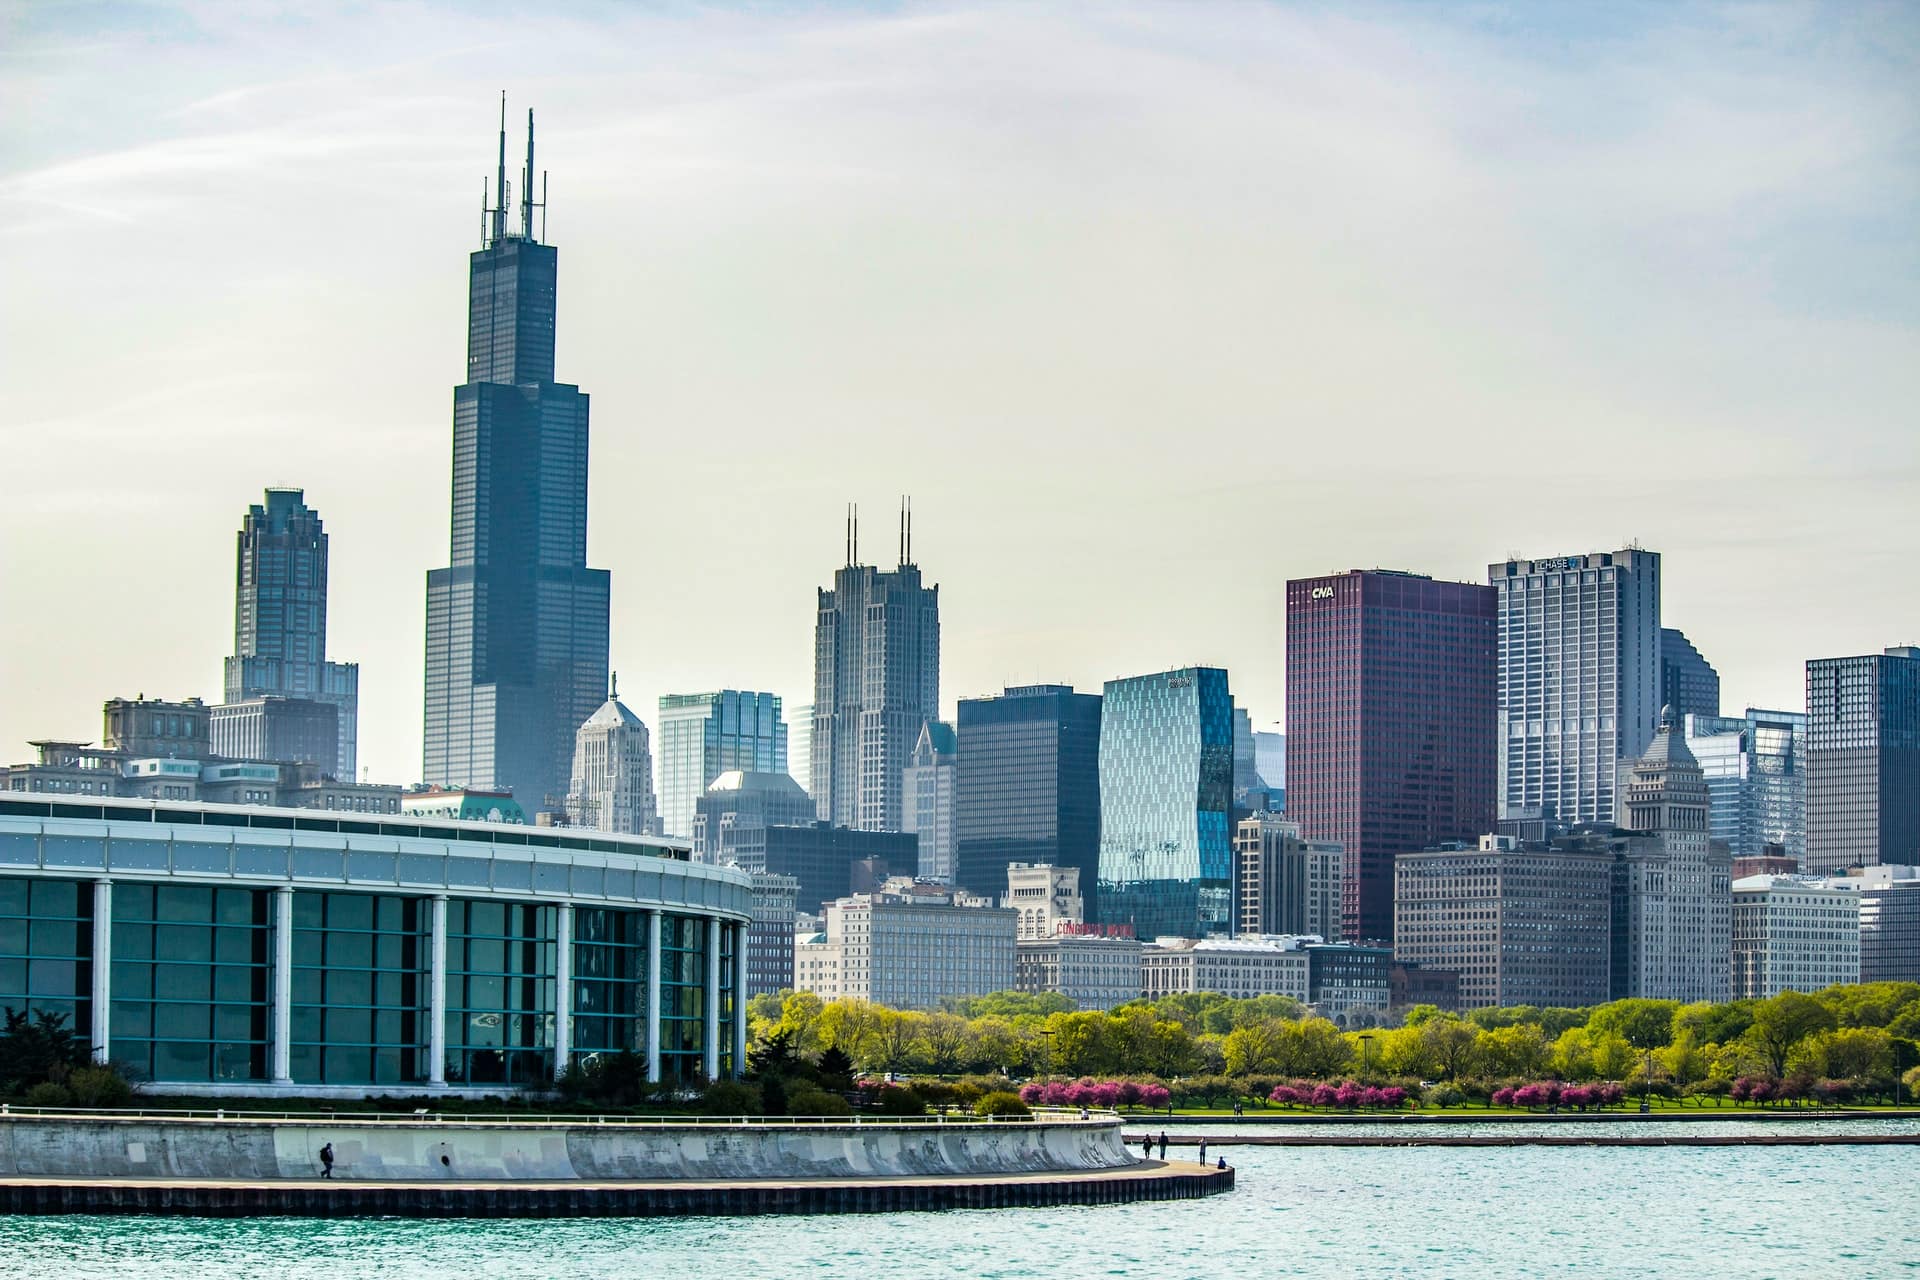 The Willis Tower gives an excellent view of the city's skyline.